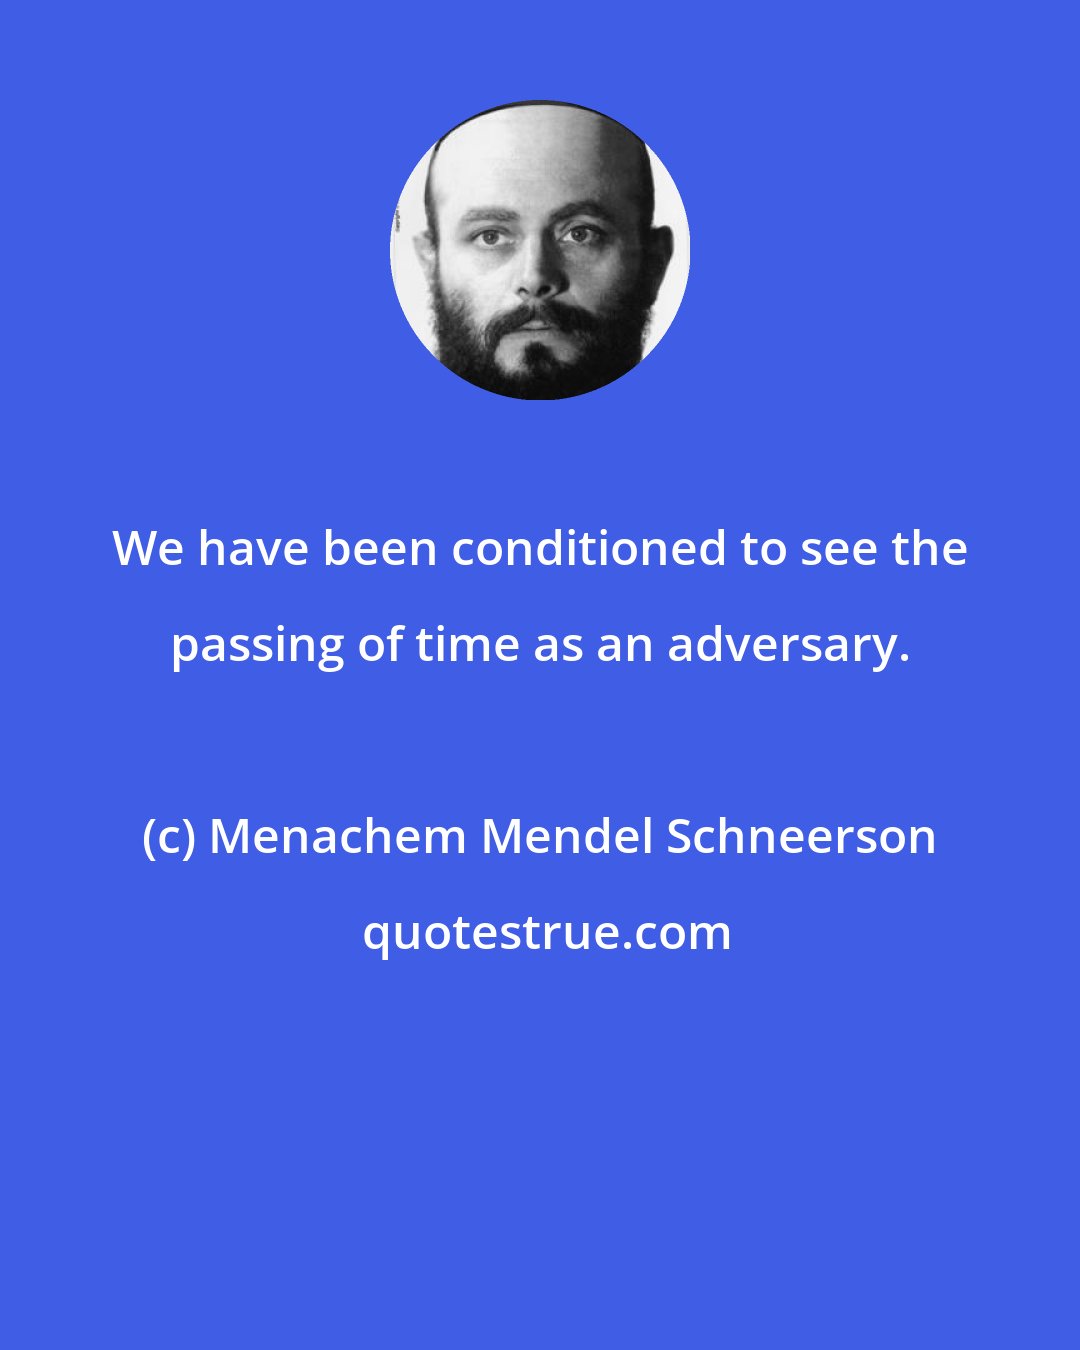 Menachem Mendel Schneerson: We have been conditioned to see the passing of time as an adversary.